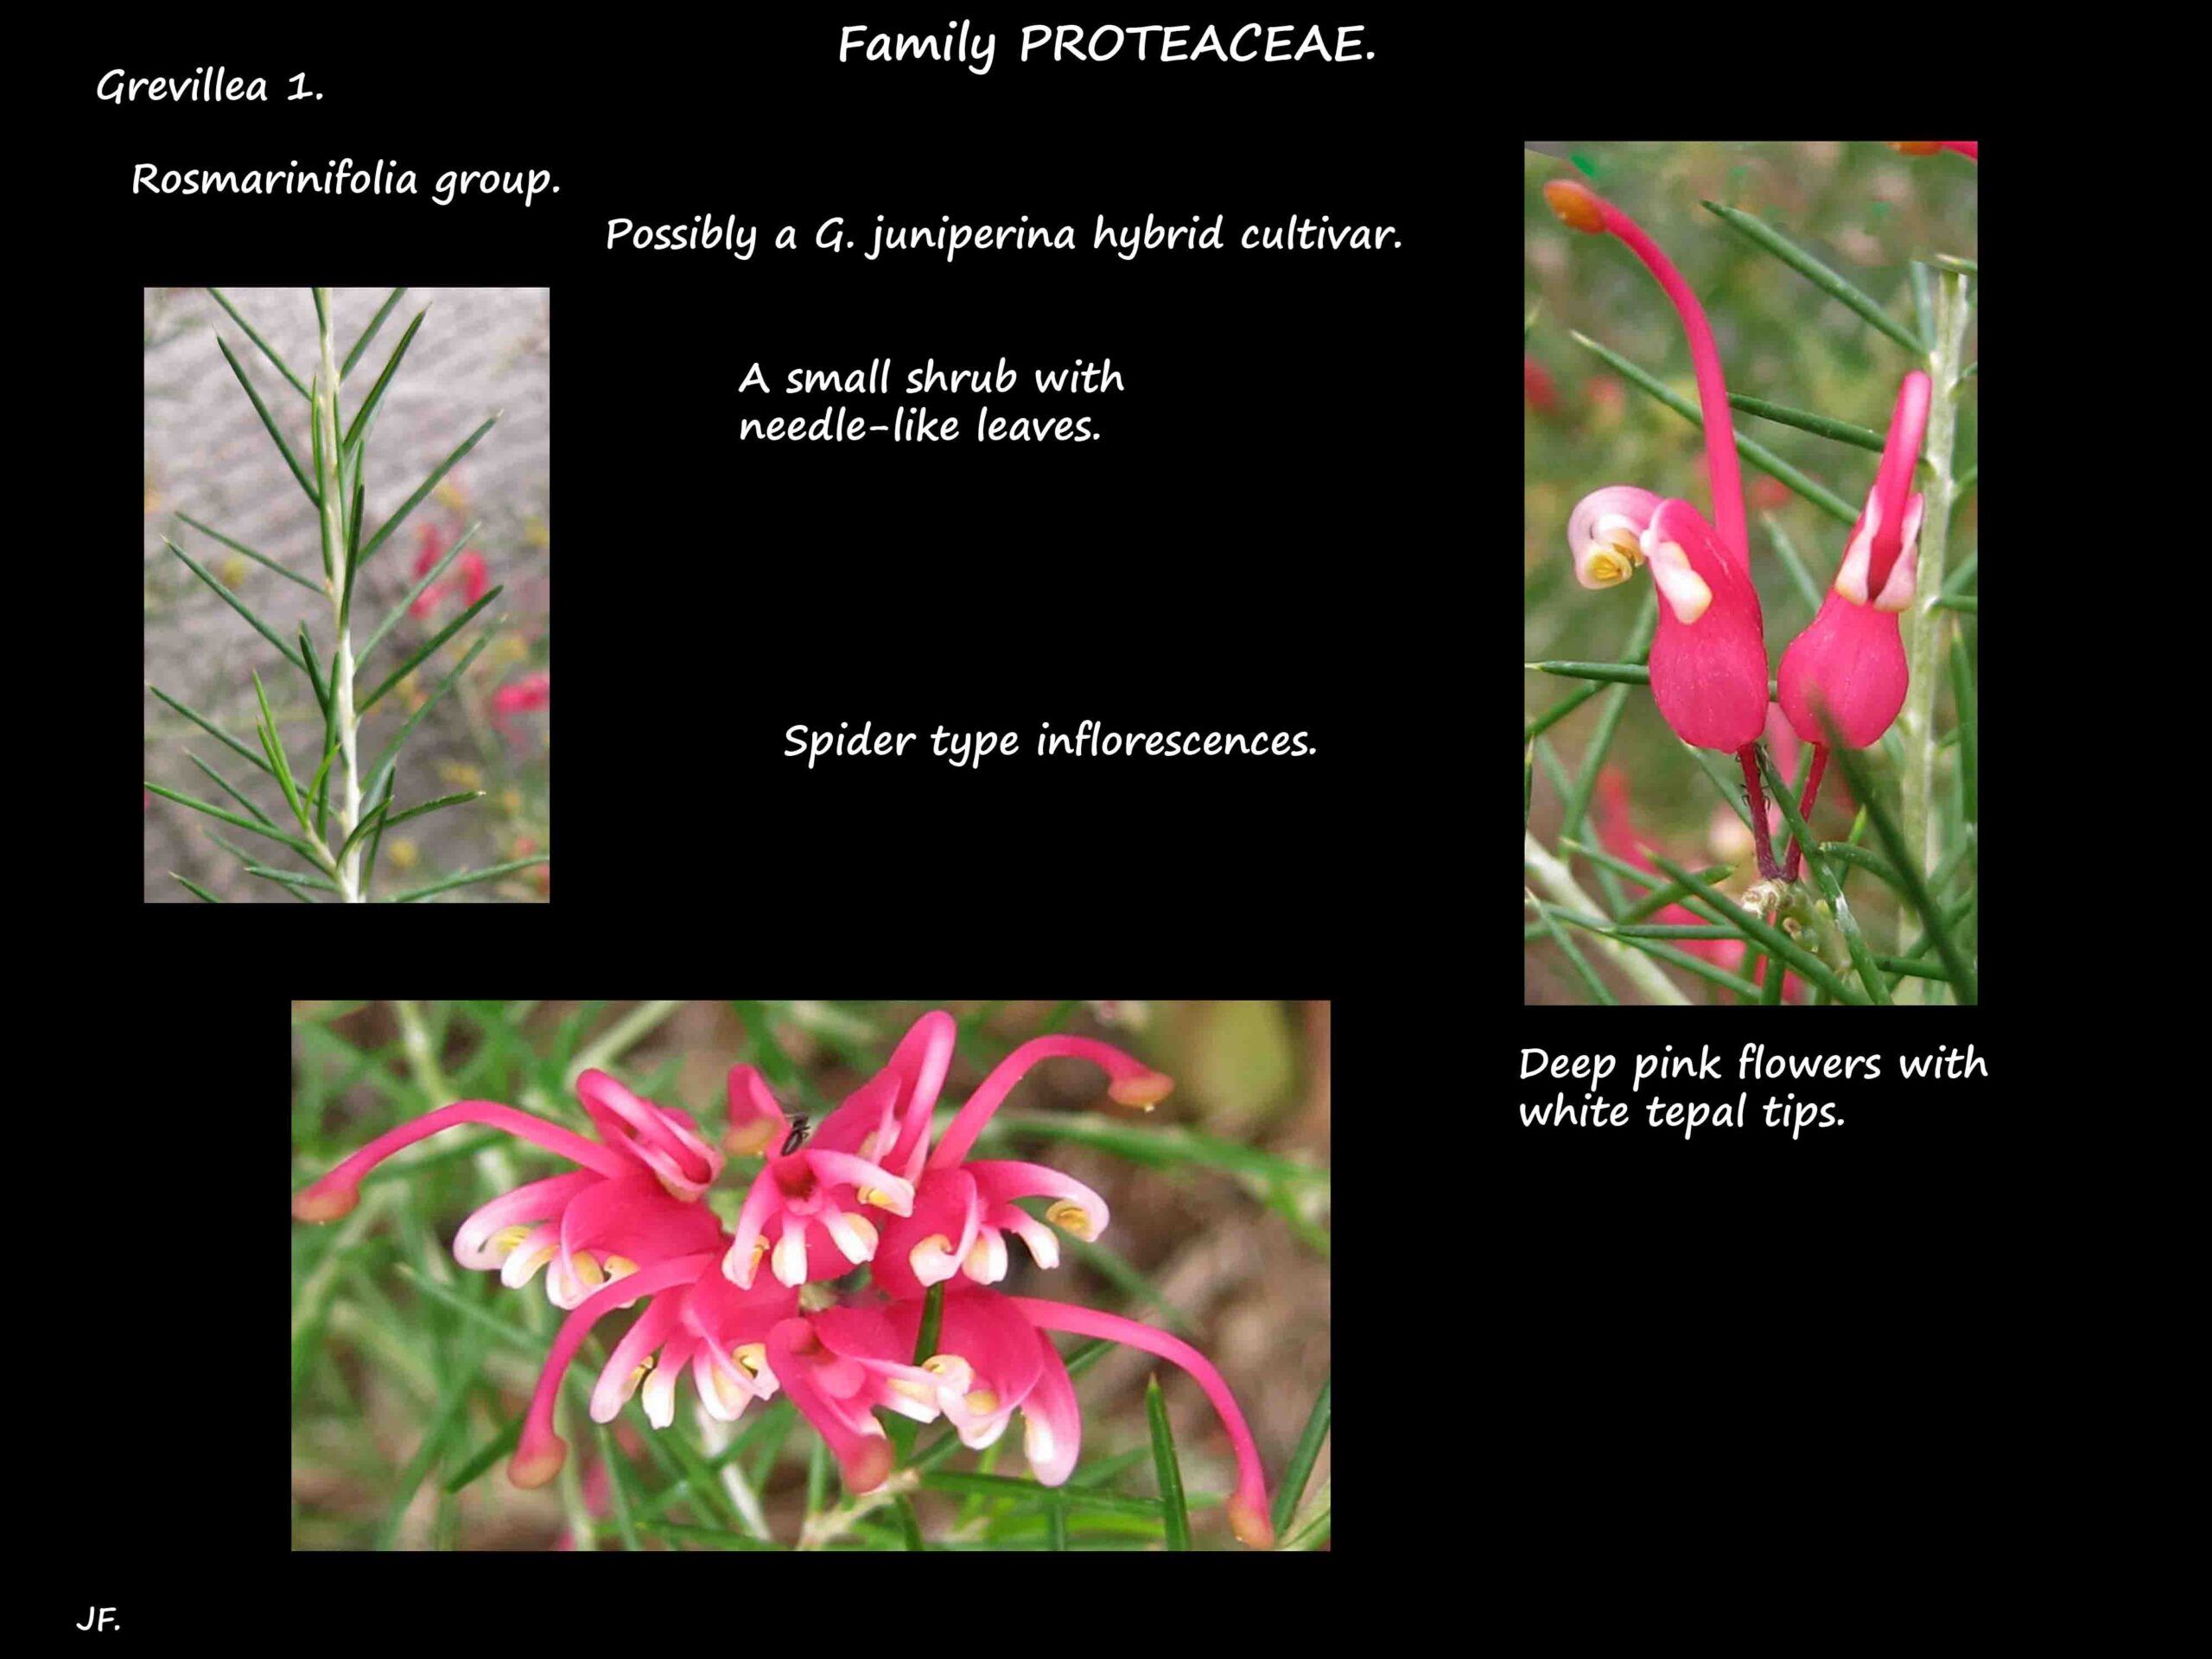 1 Grevillea with deep pink flowers